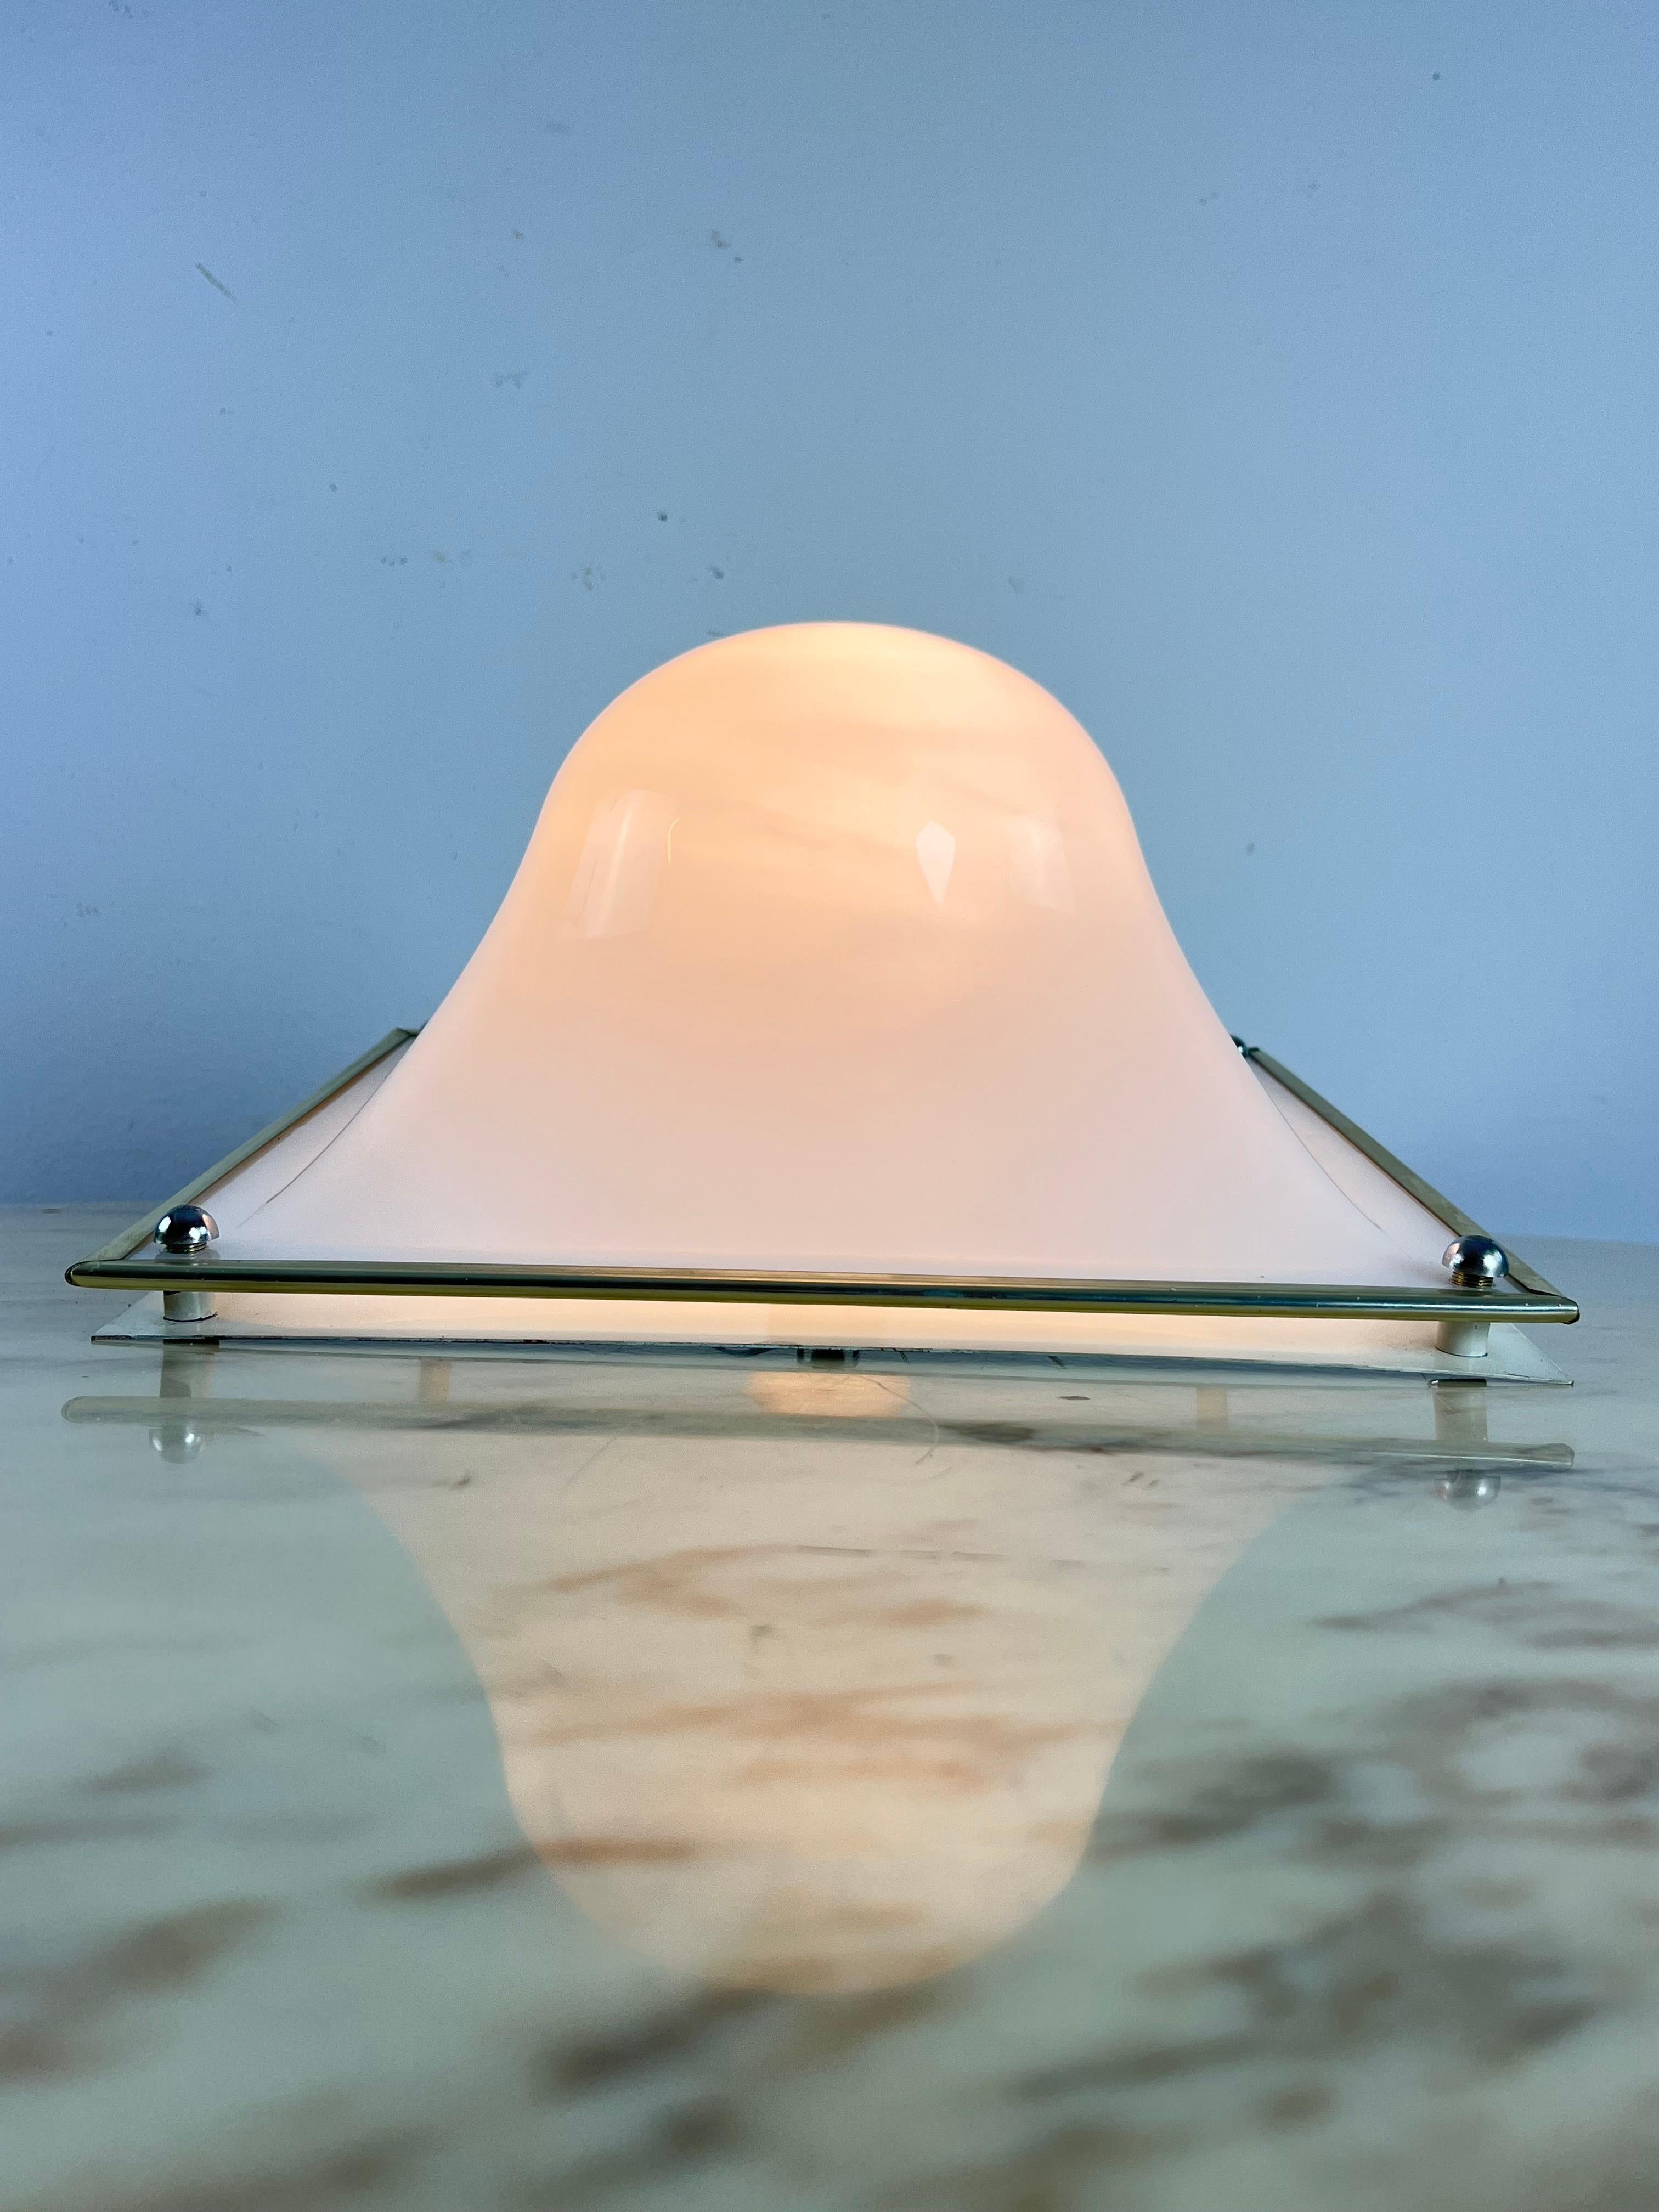 Vintage plexiglass ceiling light, Italian design 1970s
Metal structure, E27 lamp
Intact and in good condition, small signs of aging.